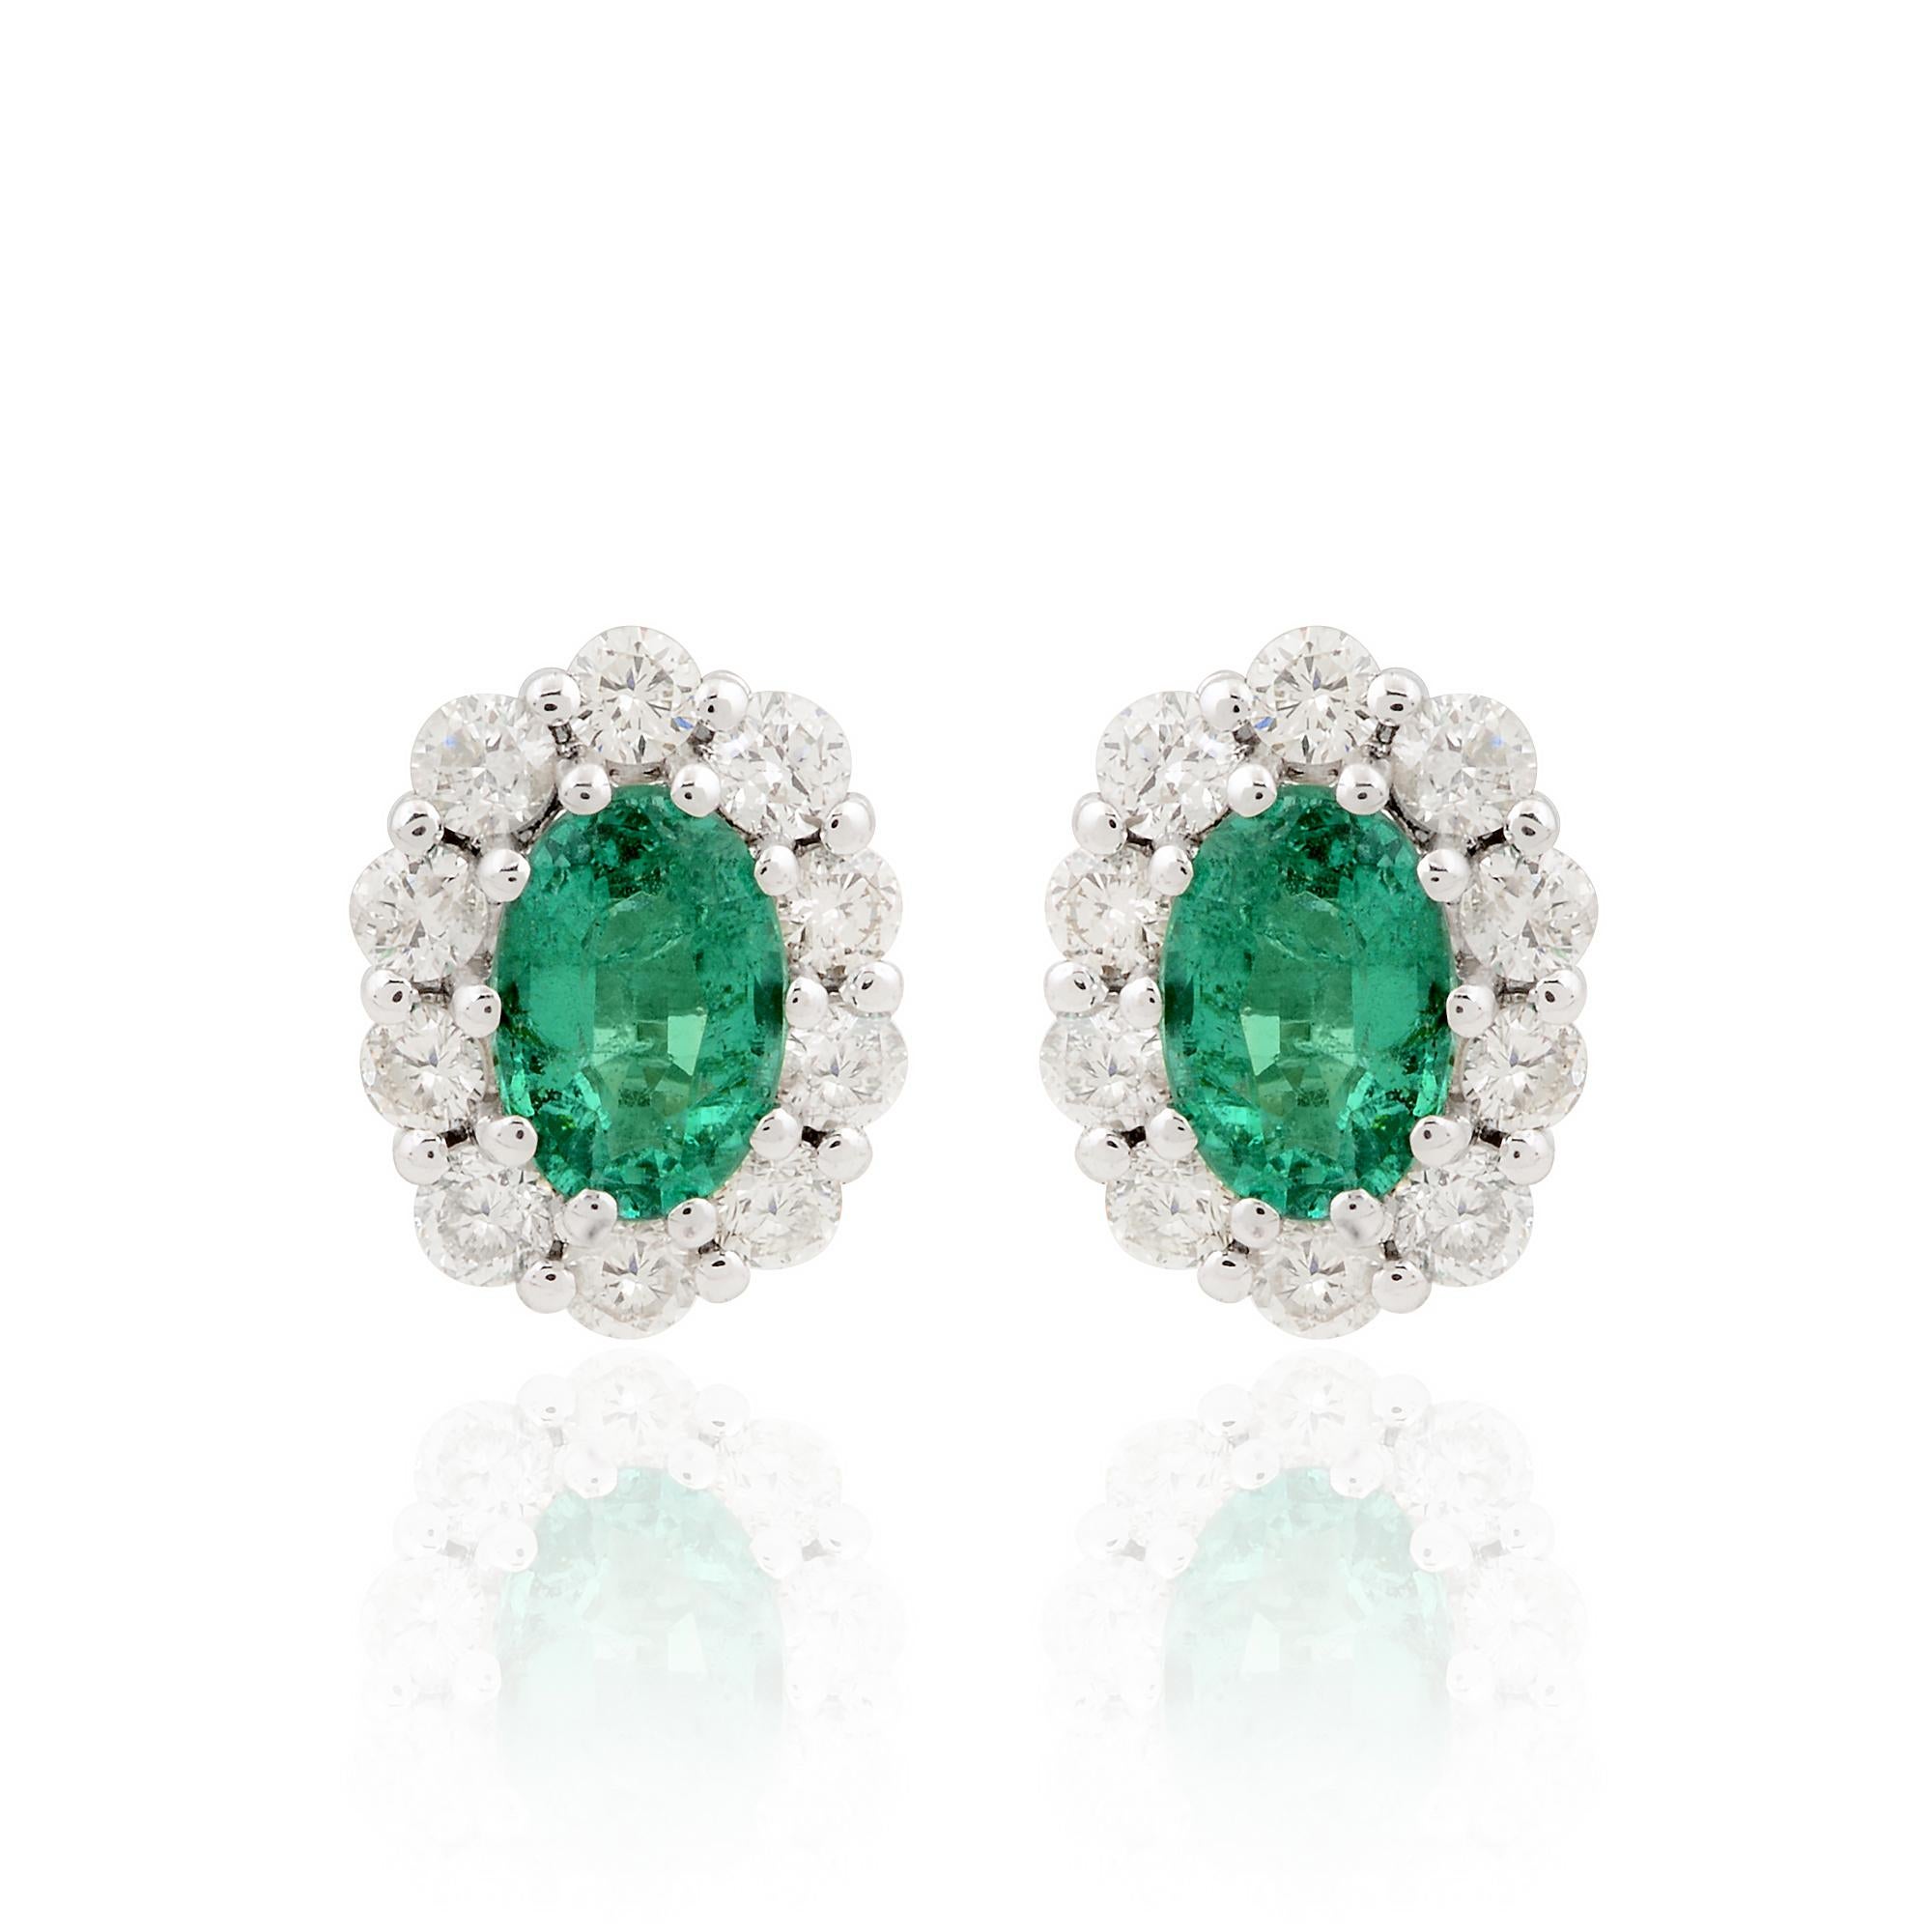 Item Code :- SEE-1813B
Gross Wt. :- 2.81 gm
18k Solid White Gold Wt. :- 2.50 gm
Natural Diamond Wt. :- 0.60 Ct. ( AVERAGE DIAMOND CLARITY SI1-SI2 & COLOR H-I )
Zambian Emerald Wt. :- 0.95 Ct.
Earrings Size :- 10 x8 mm approx.

✦